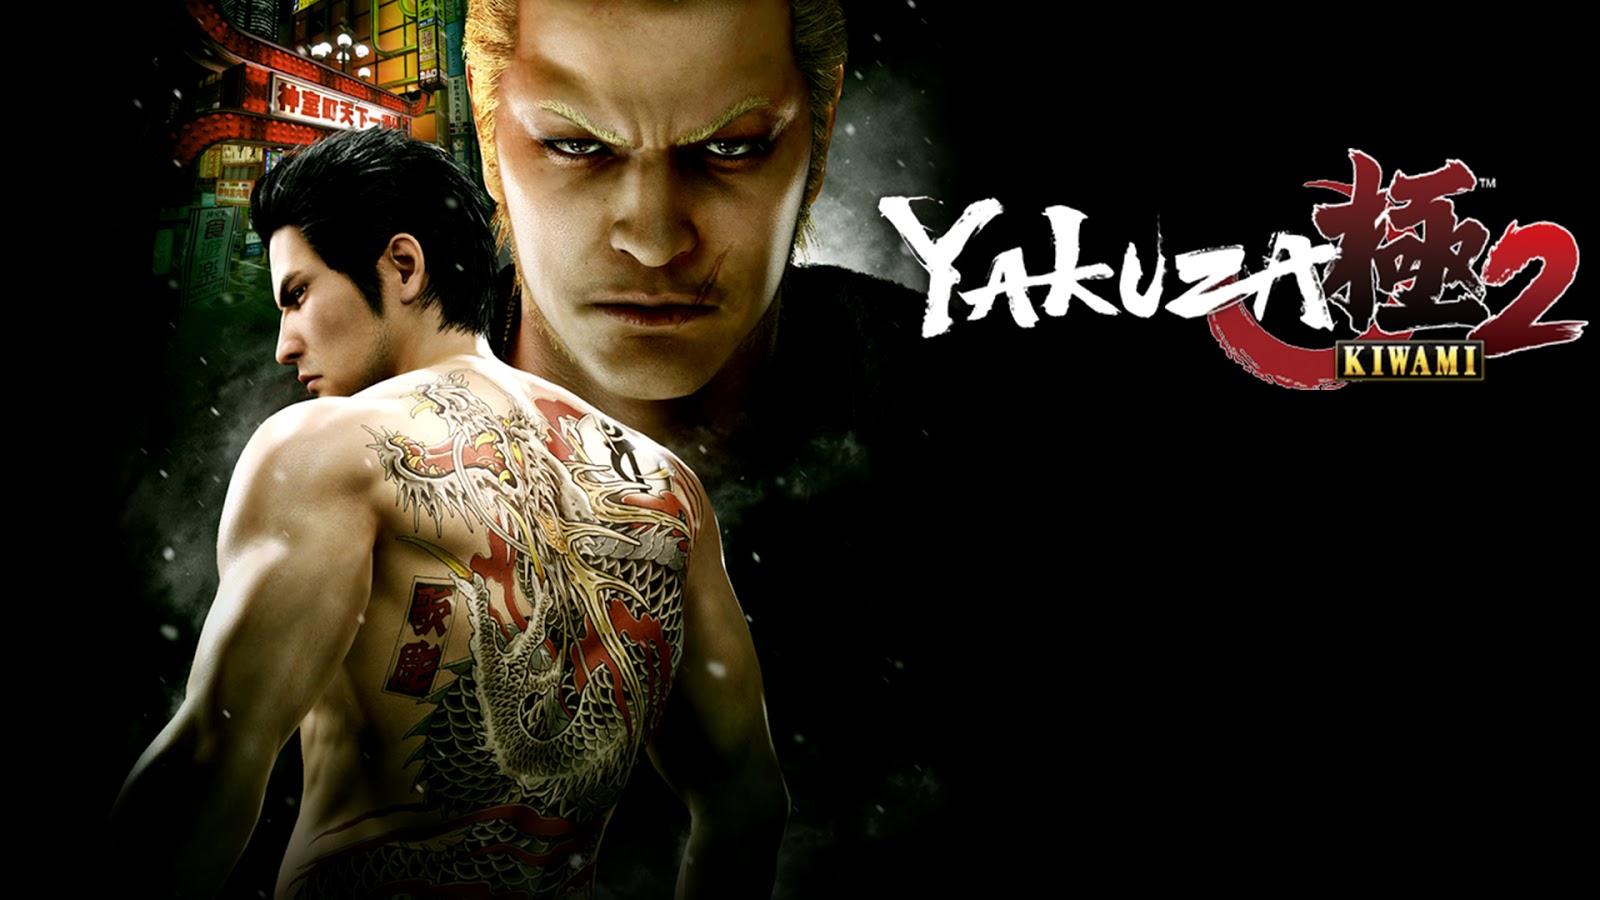 When are Yakuza Games leaving Xbox Game Pass?